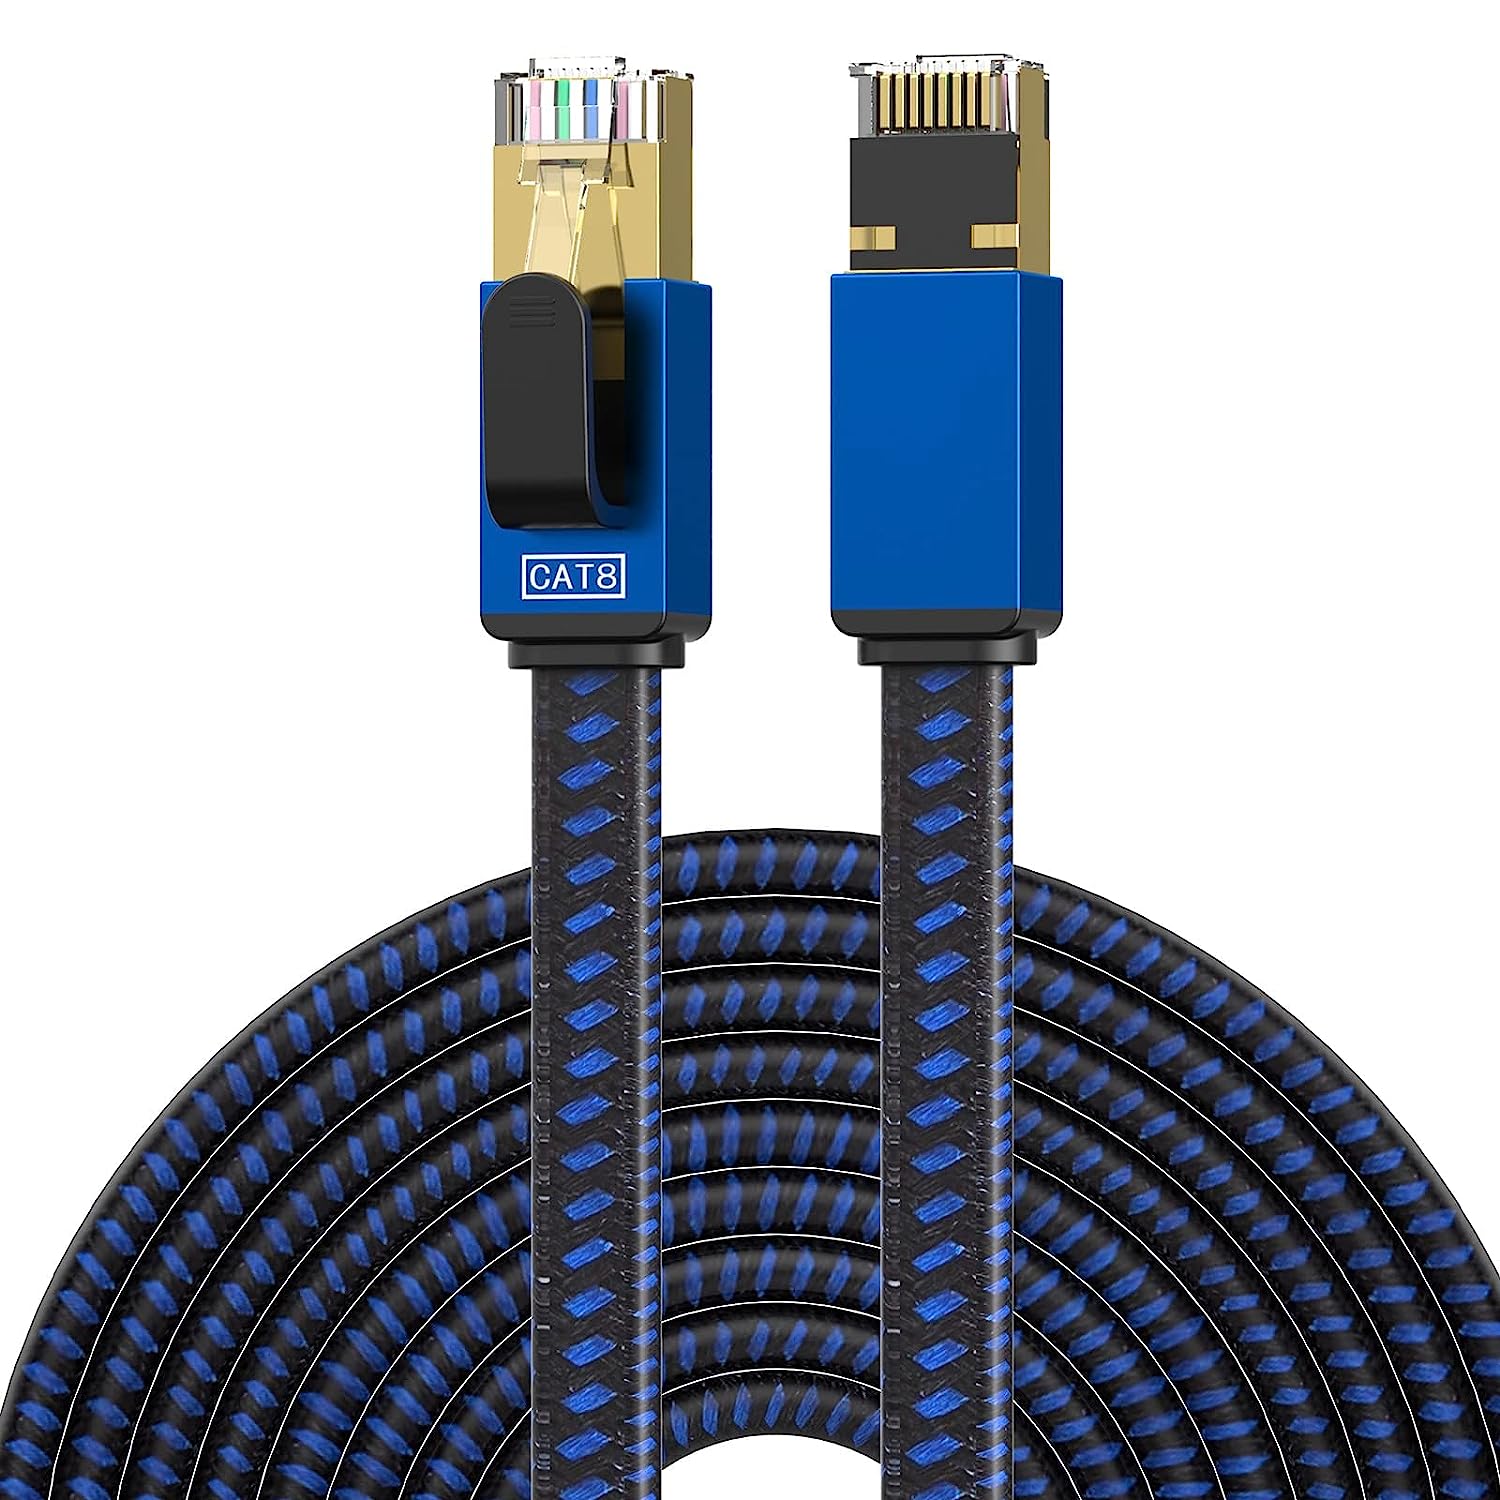 LEKVKM Ethernet Cable 75 FT Cat 8 High Speed Long [...]